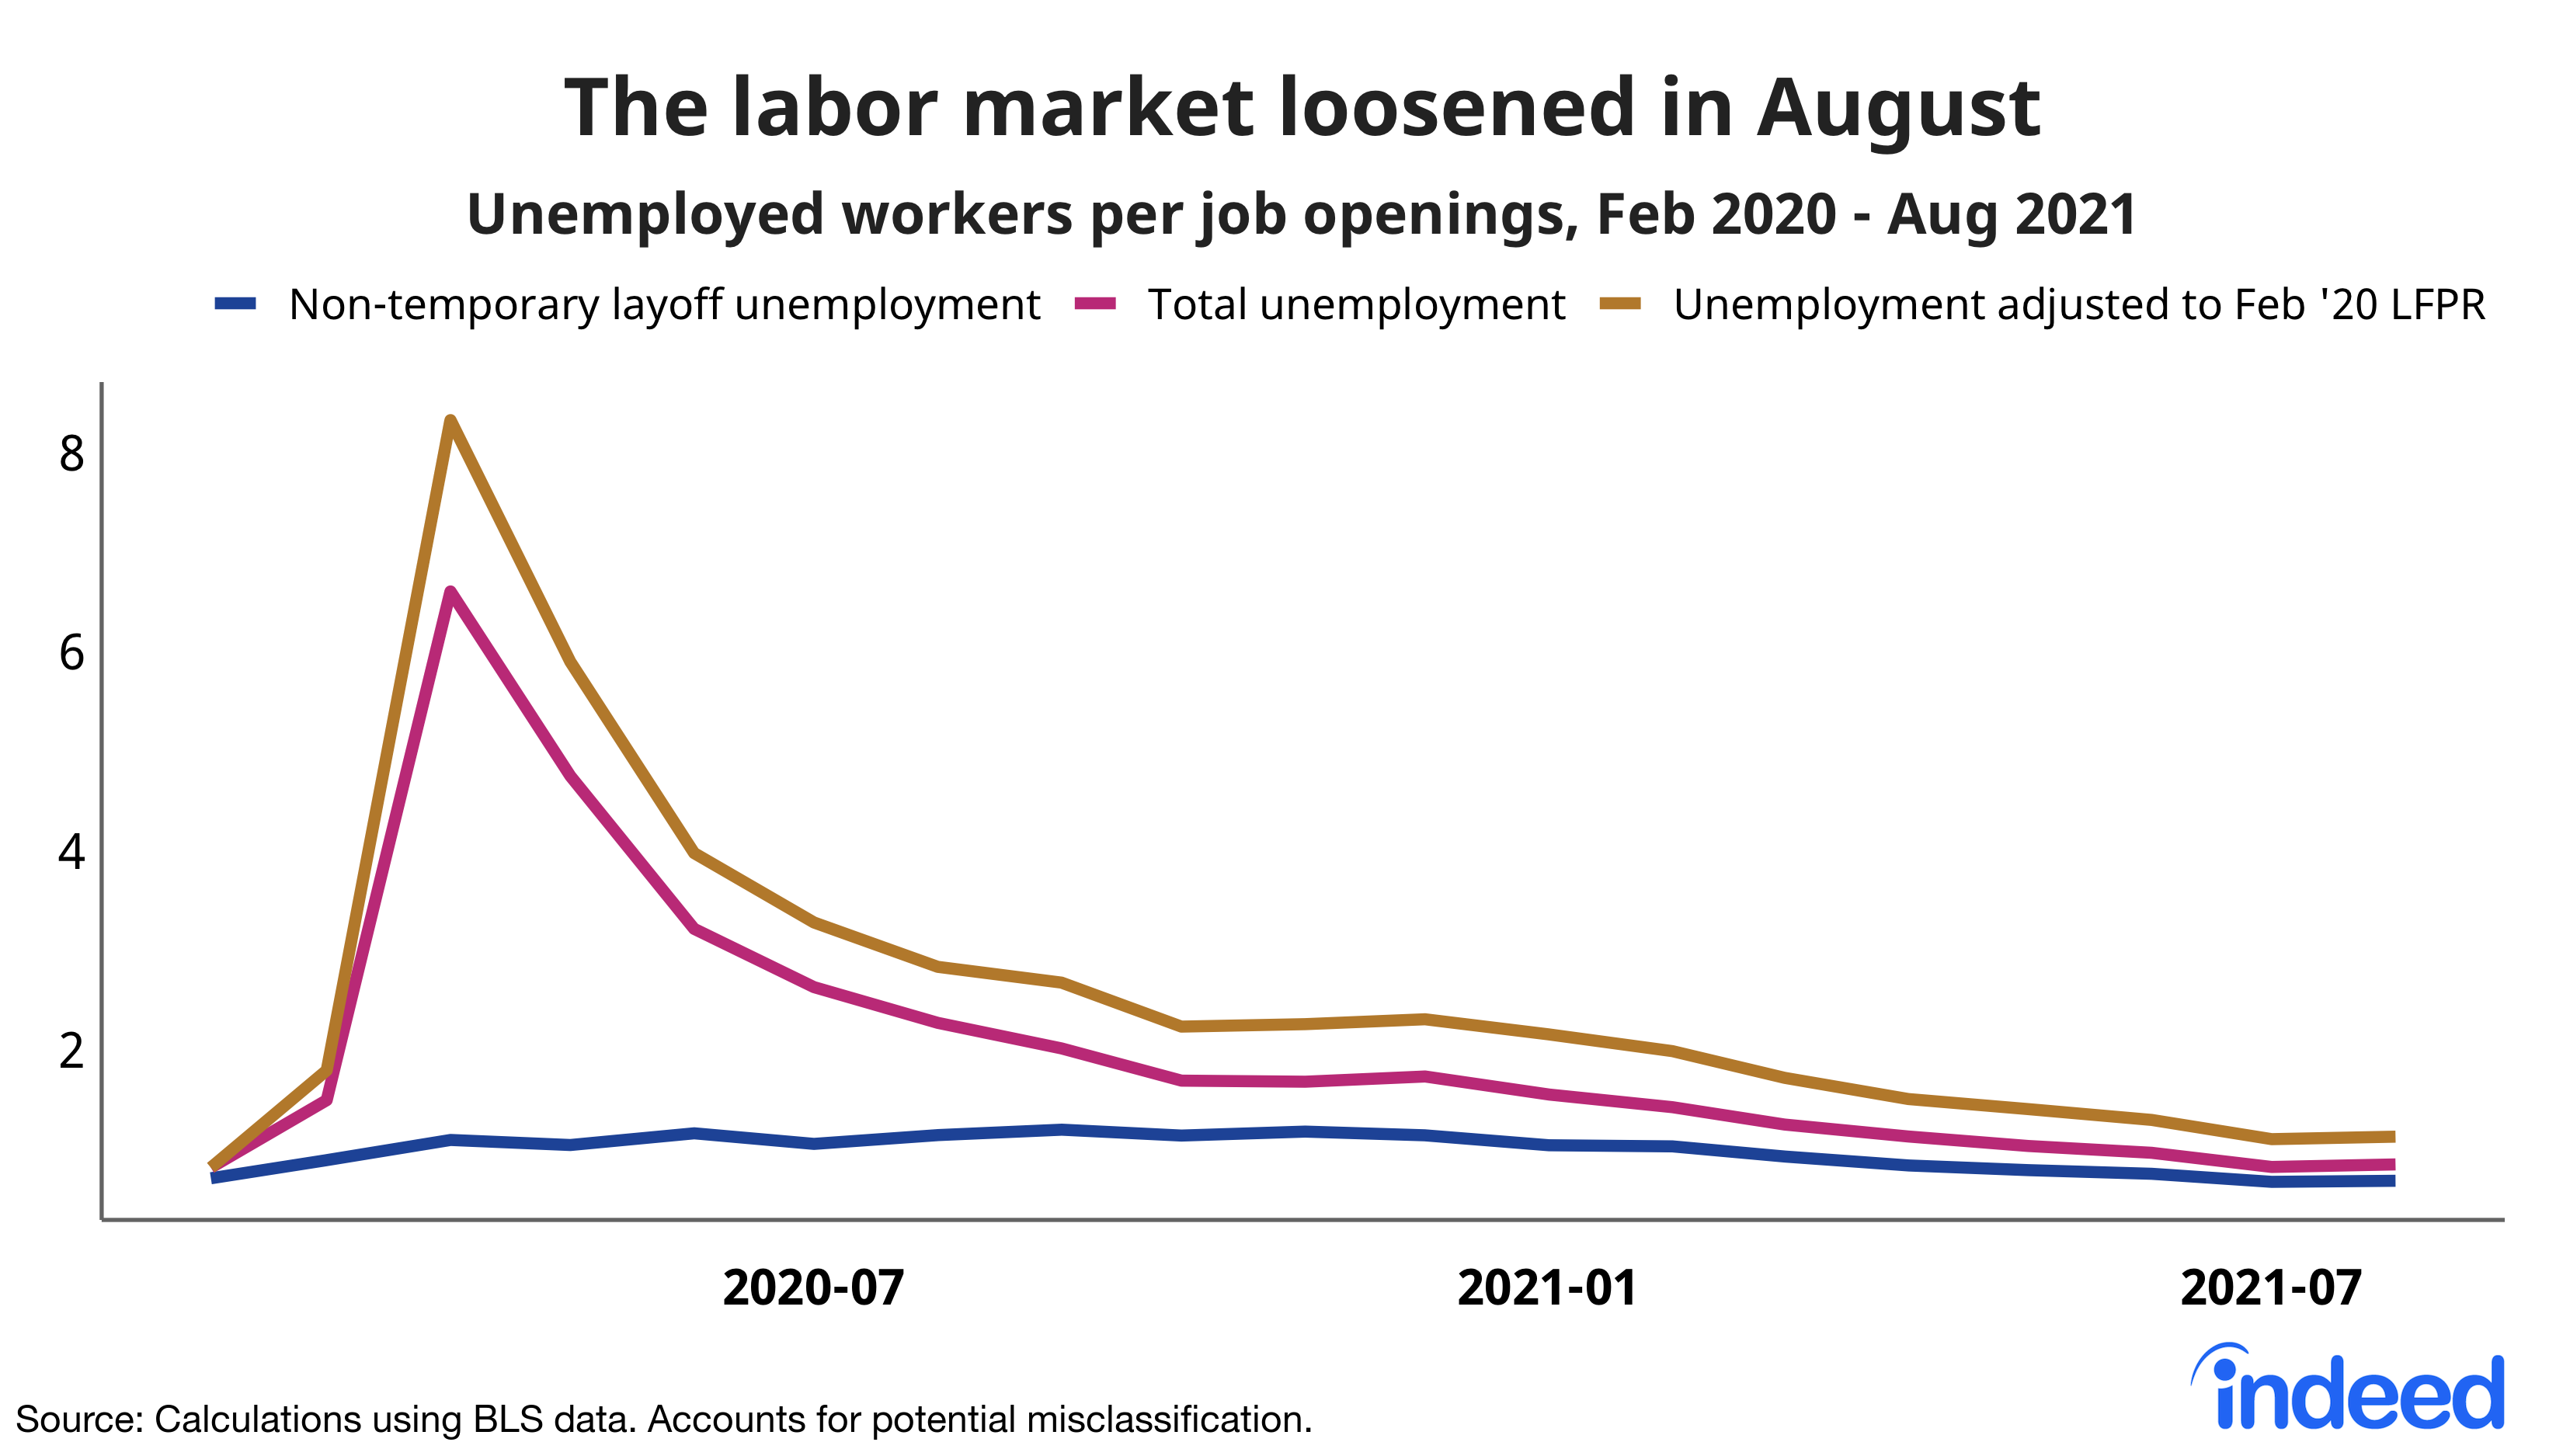 Line chart showing unemployed workers per job openings from February 2020 through August 2021. The chart compares non-temporary layoff unemployment, total unemployment and unemployment adjusted to the February 2020 labor force participation rate. The chart shows that the labor market loosened in August of 2021.